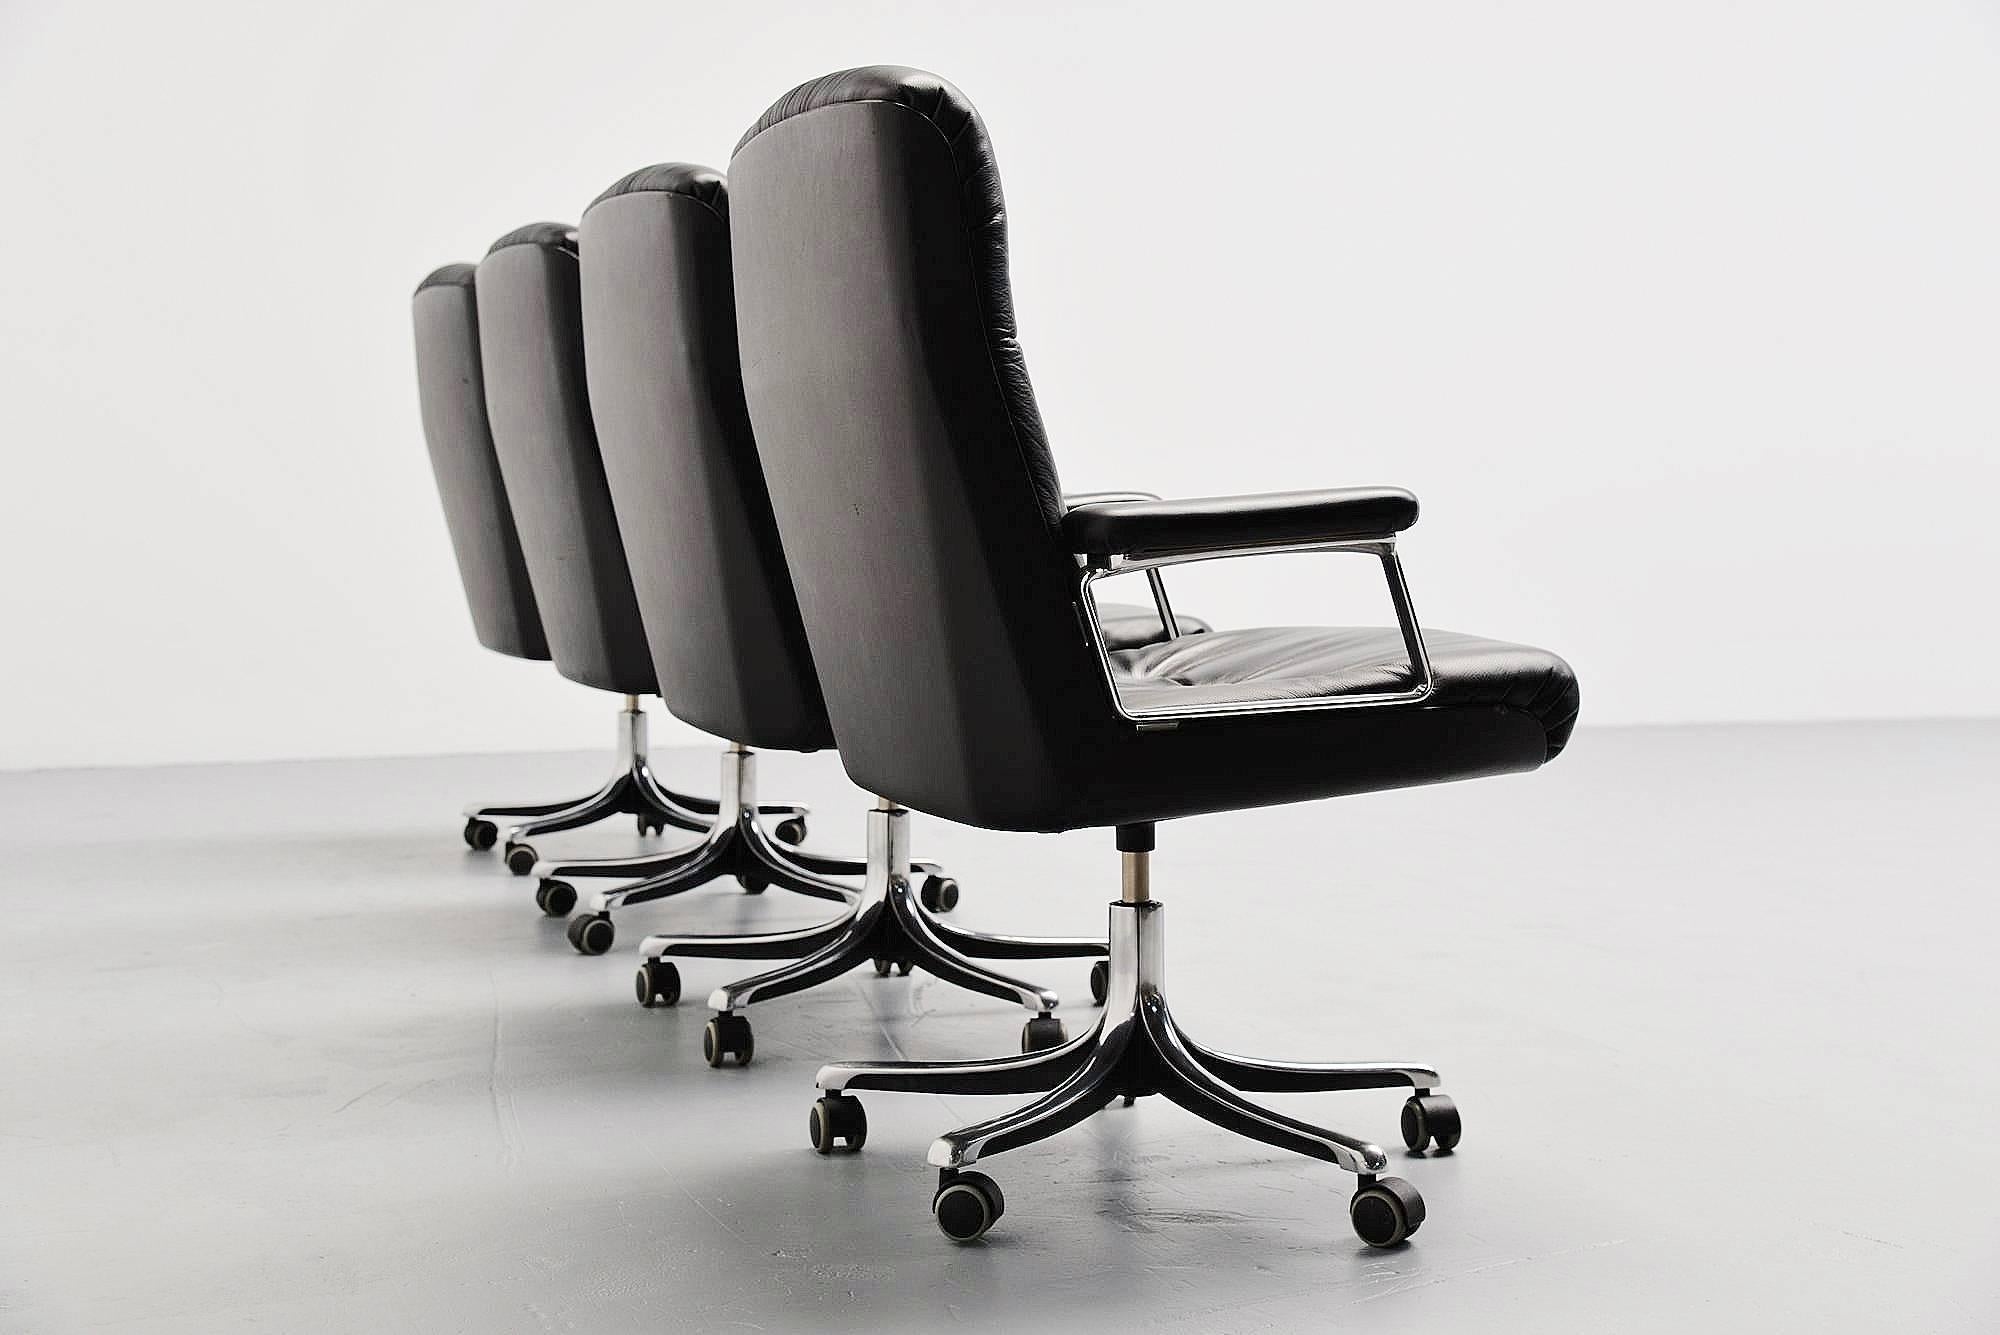 Nice set of four executive office armchairs designed by Osvaldo Borsani, manufactured by Tecno, Italy, 1966-1976. These chairs are from the P125 series which were in different editions. The production was between 1966-1976. These chairs are the